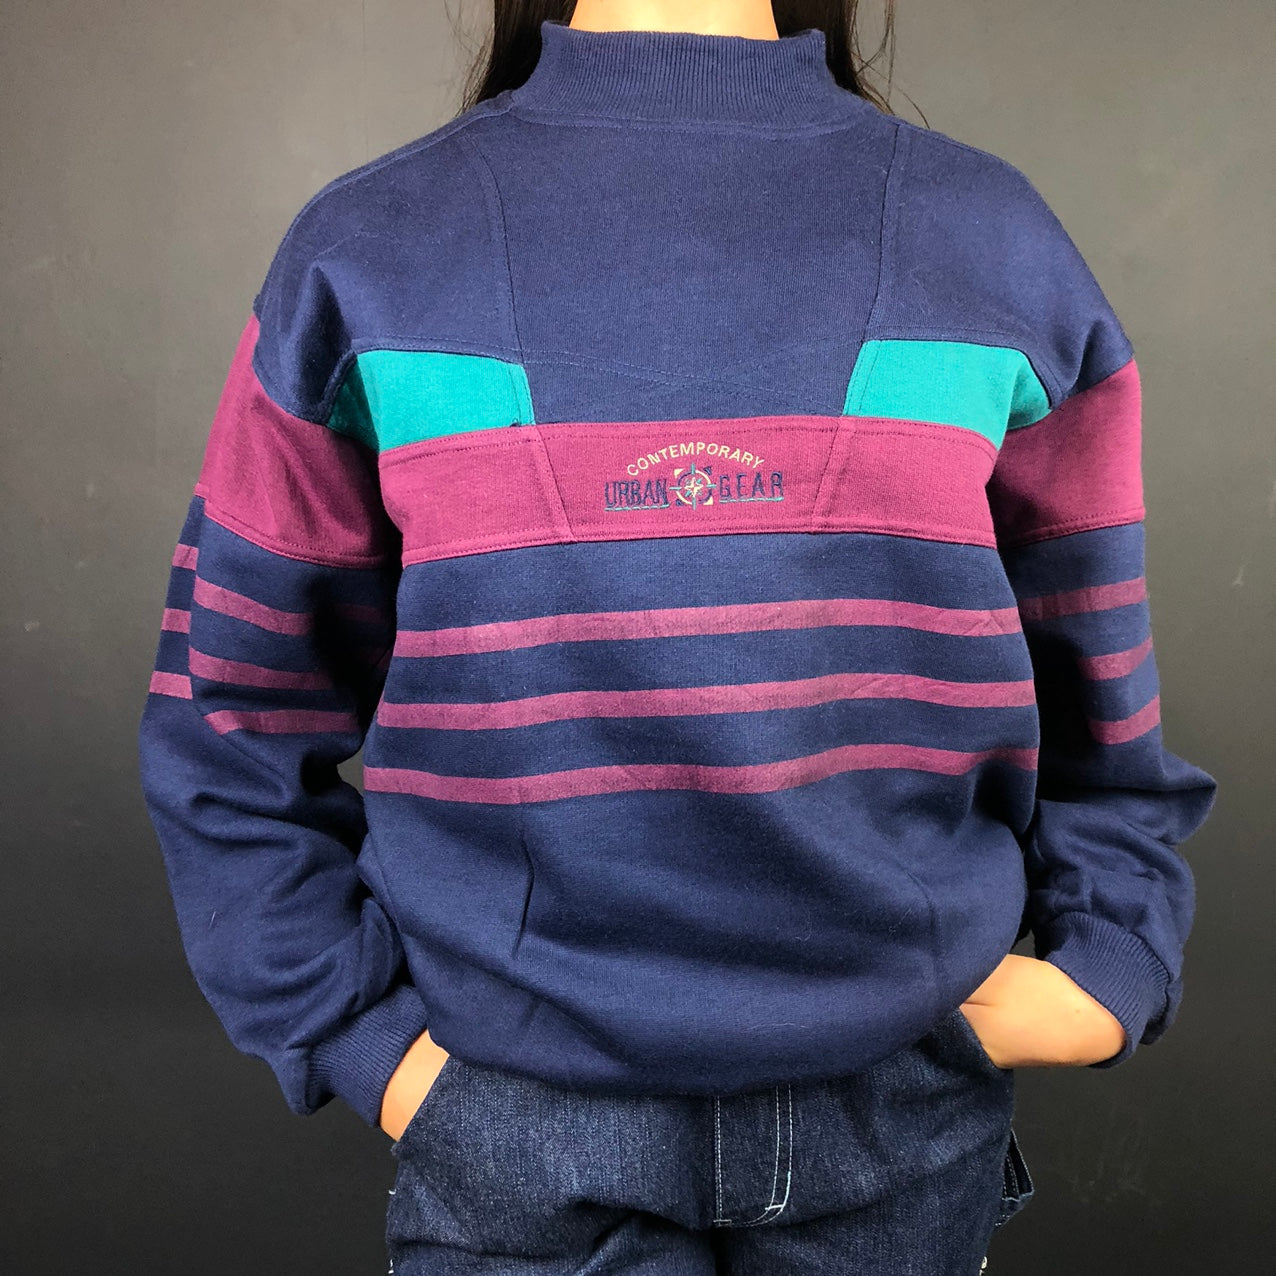 Vintage Sweatshirt with Embroidered ‘Contemporary Urban Gear’ Spellout & Mock Turtleneck